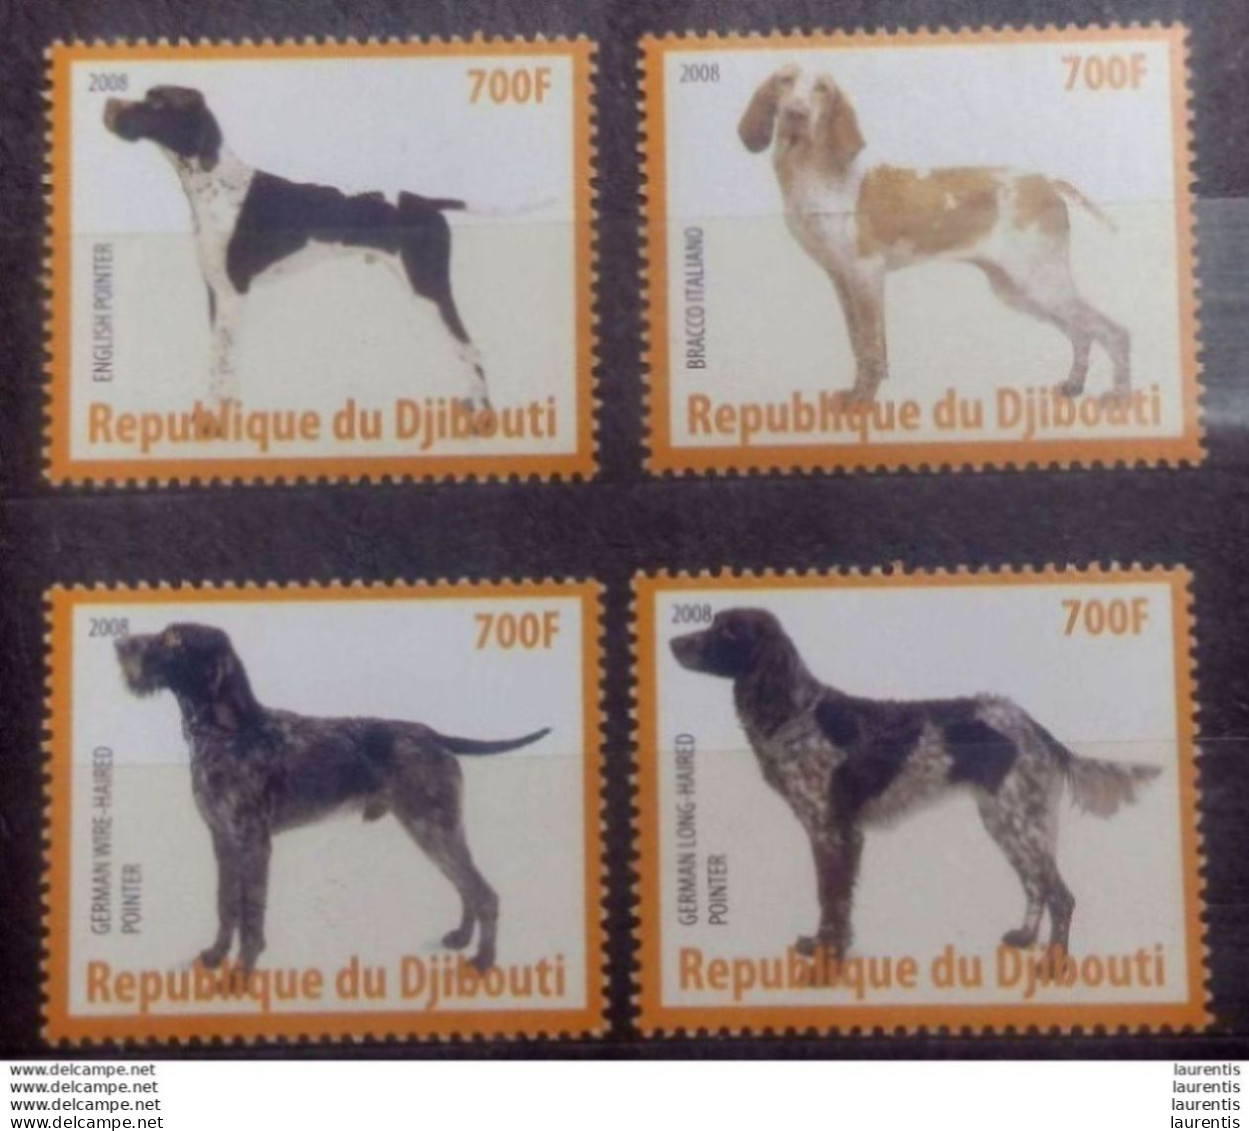 D232  Dogs - Chiens - Malawi MNH - 1,45 - Chiens